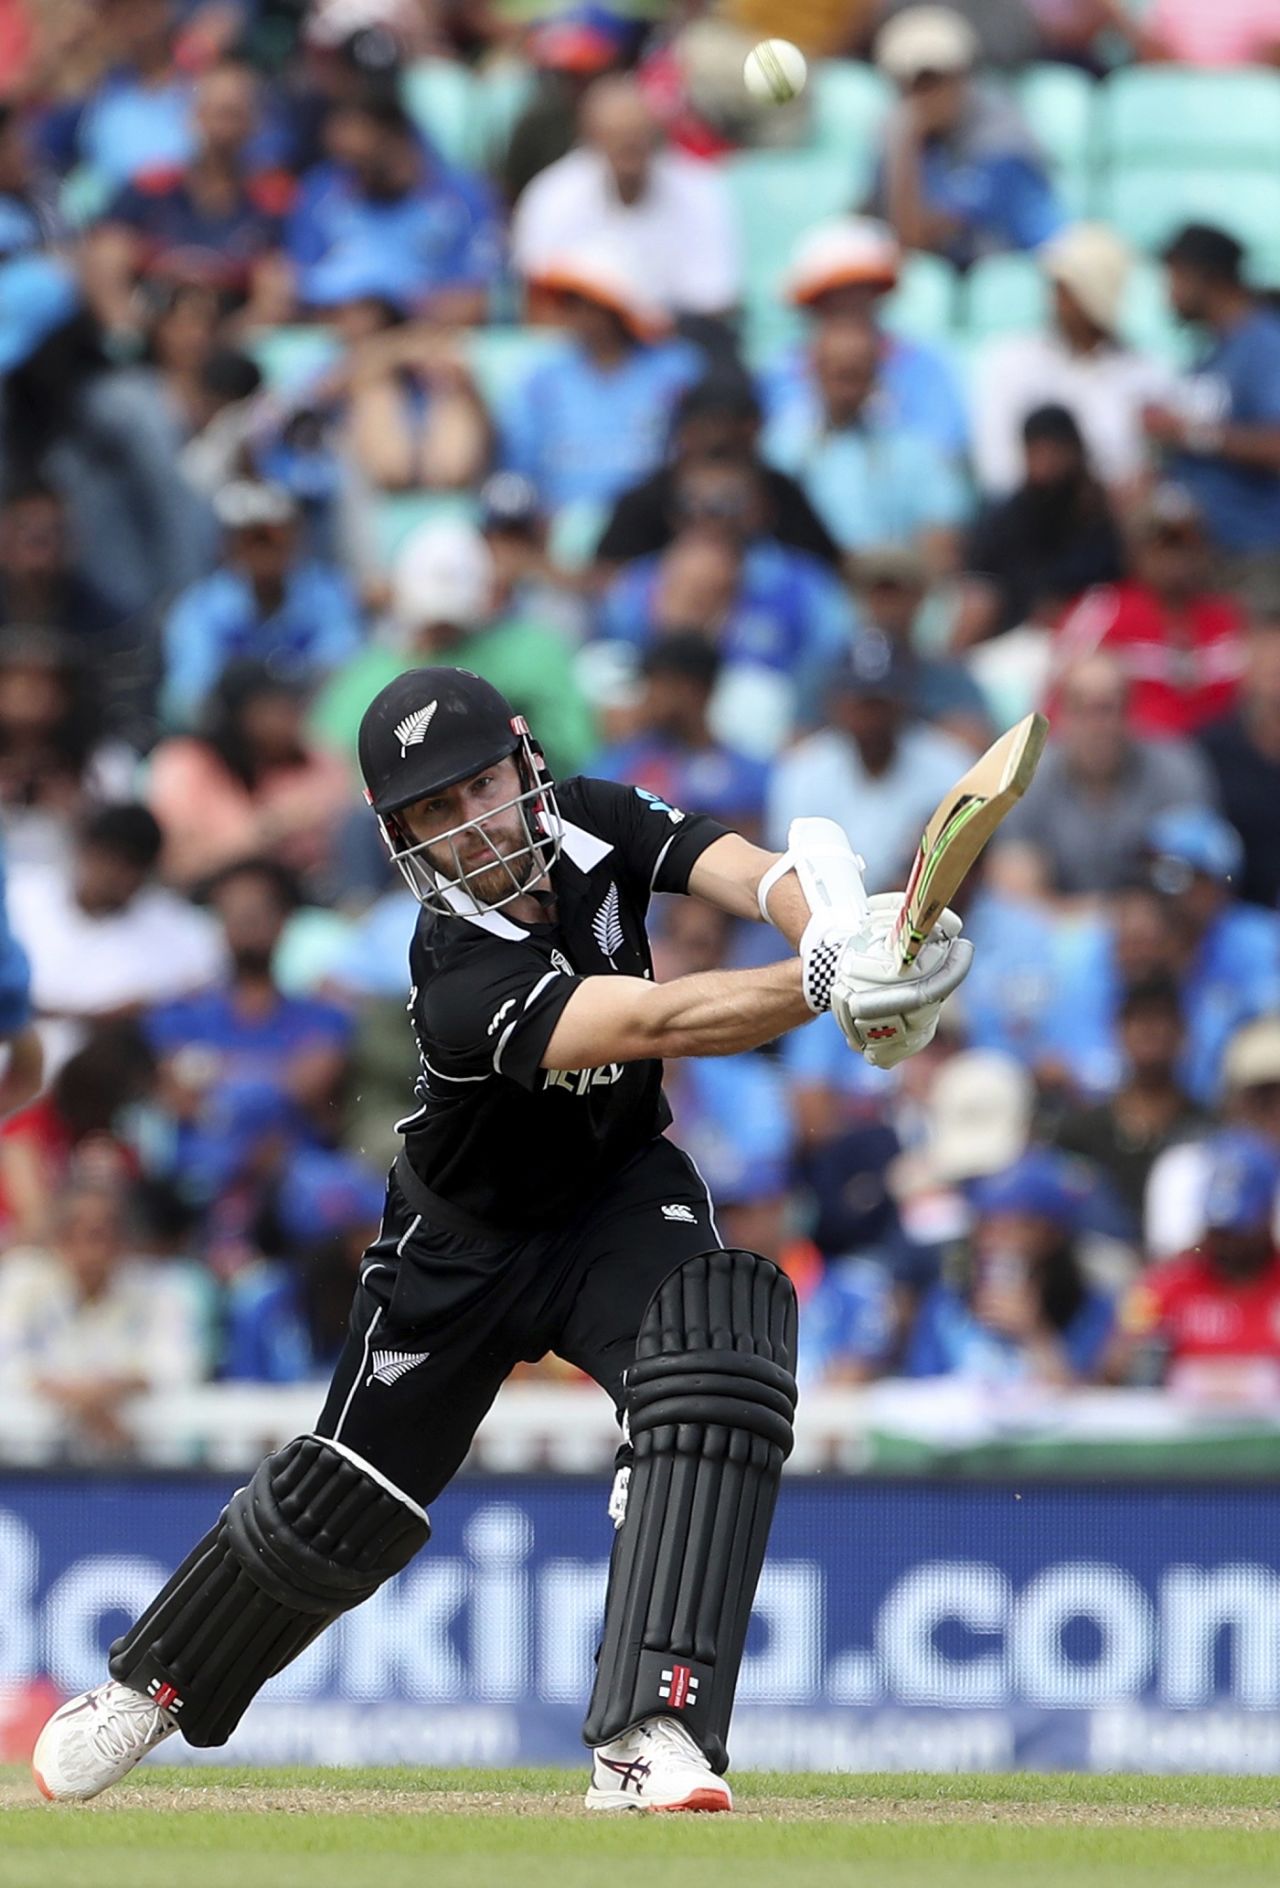 Kane Williamson drives during his half-century, India vs New Zealand, World Cup 2019, warm-up, The Oval, May 25, 2019